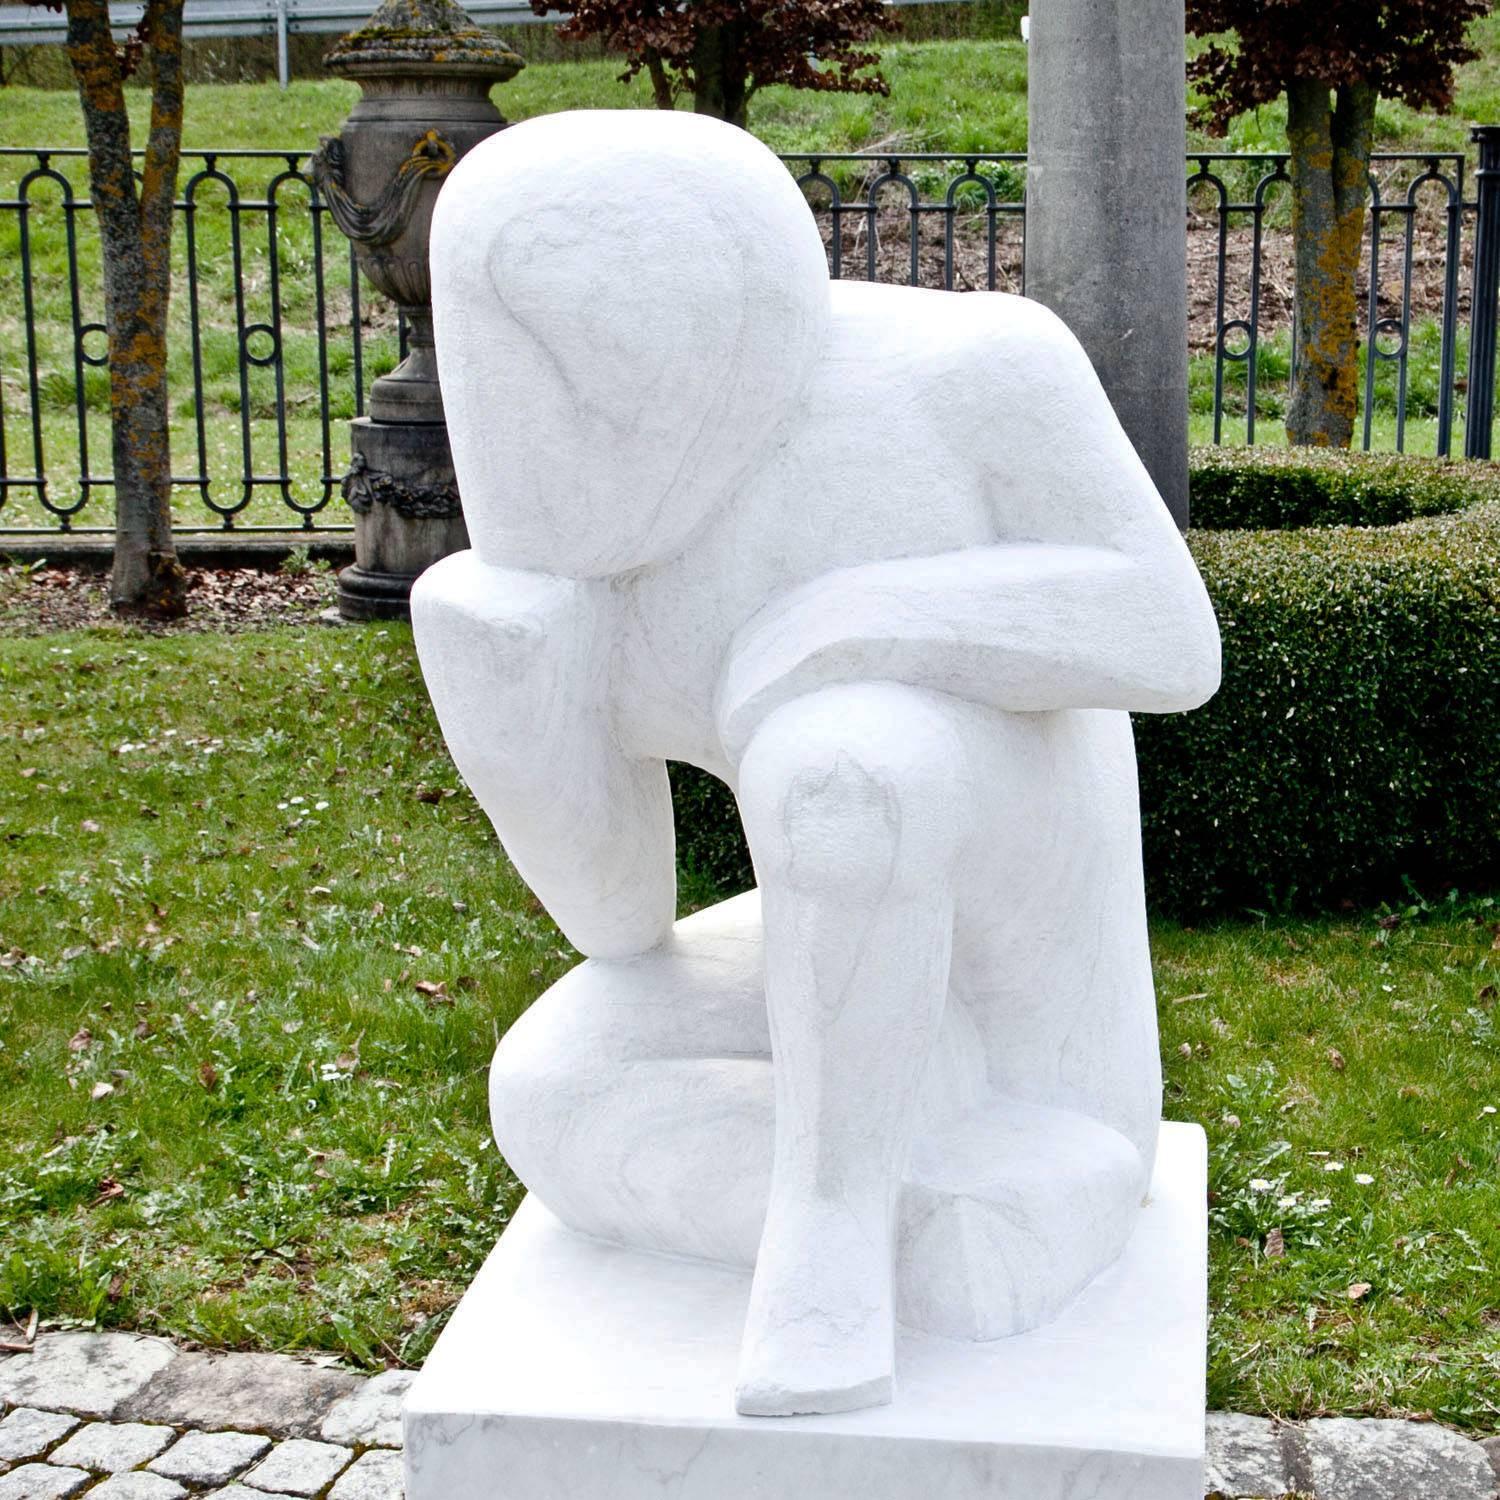 Abstract figure of a thinker, resting his head on his fist, on a square base. The sculpture was hand-carved out of white marble and has a fine surface.